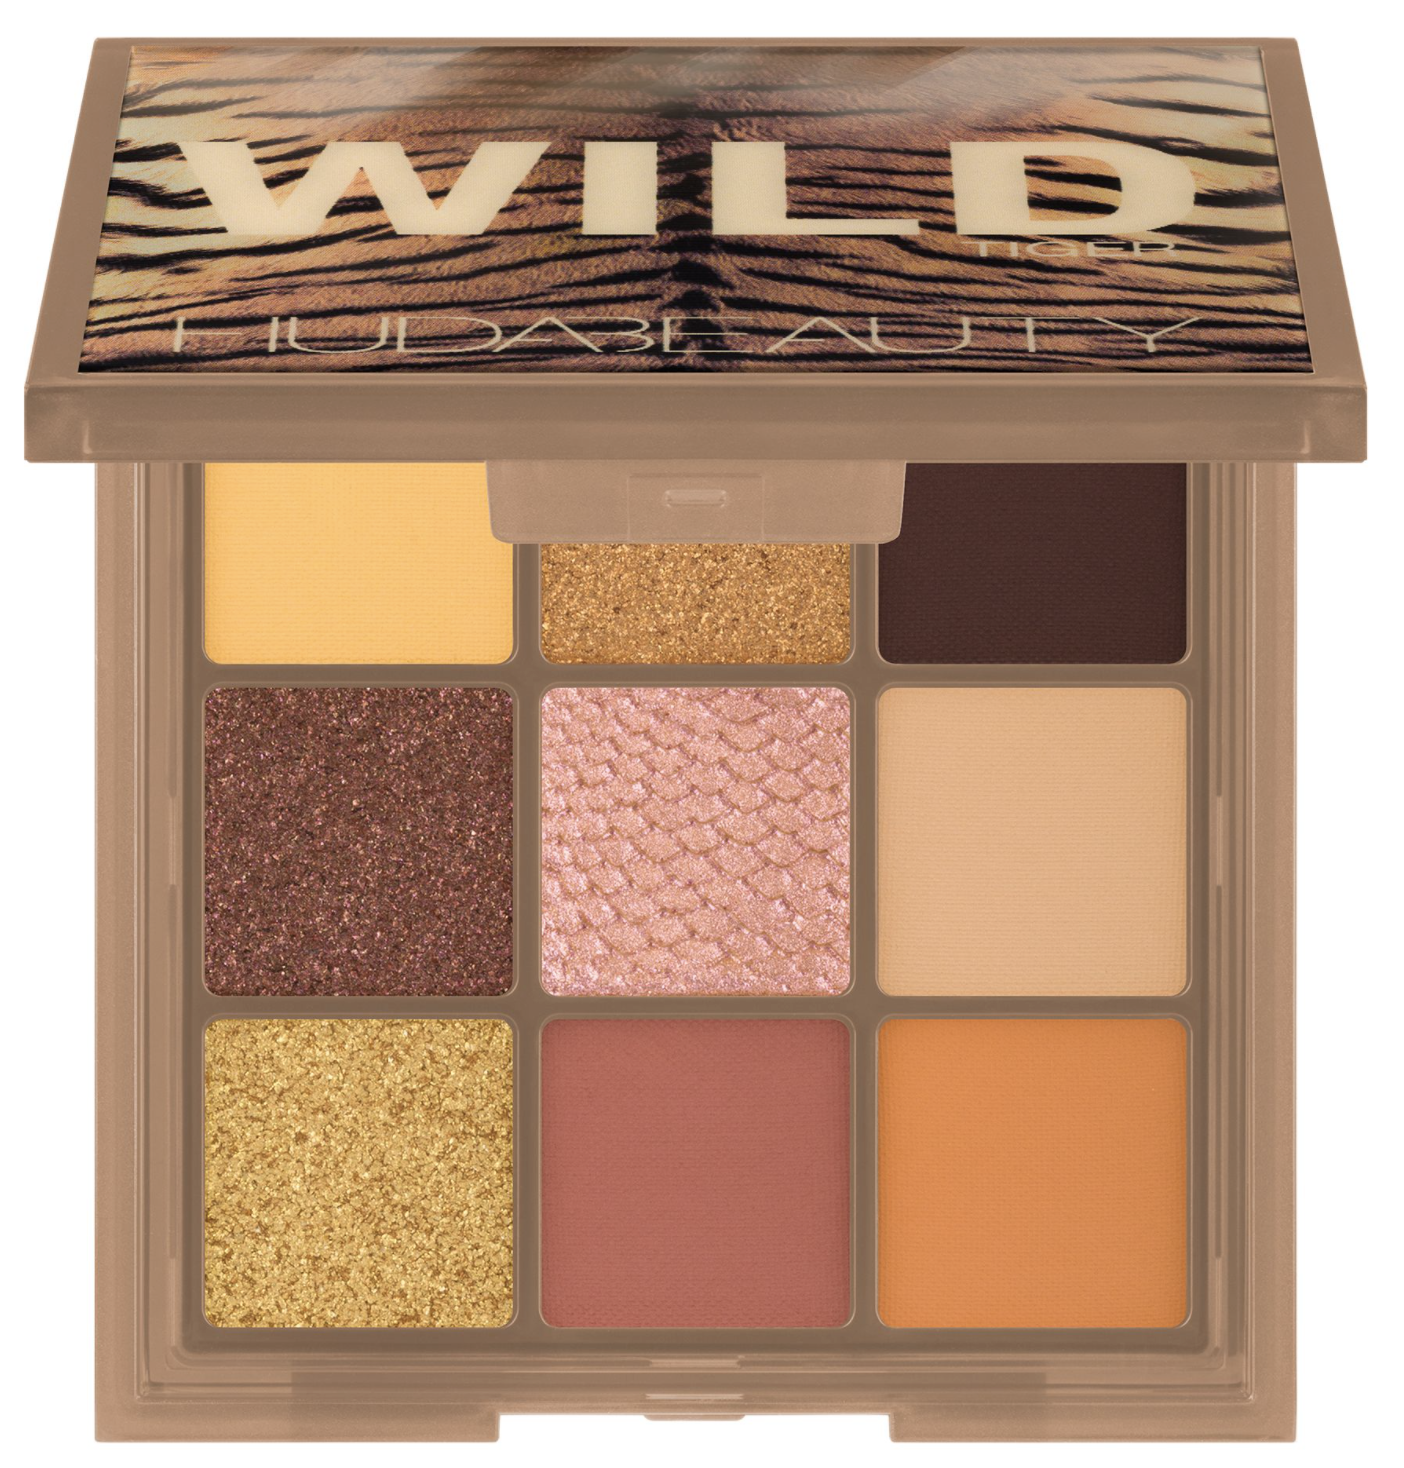 HUDA BEAUTY | Wild Obsessions Eyeshadow Palette - Tiger